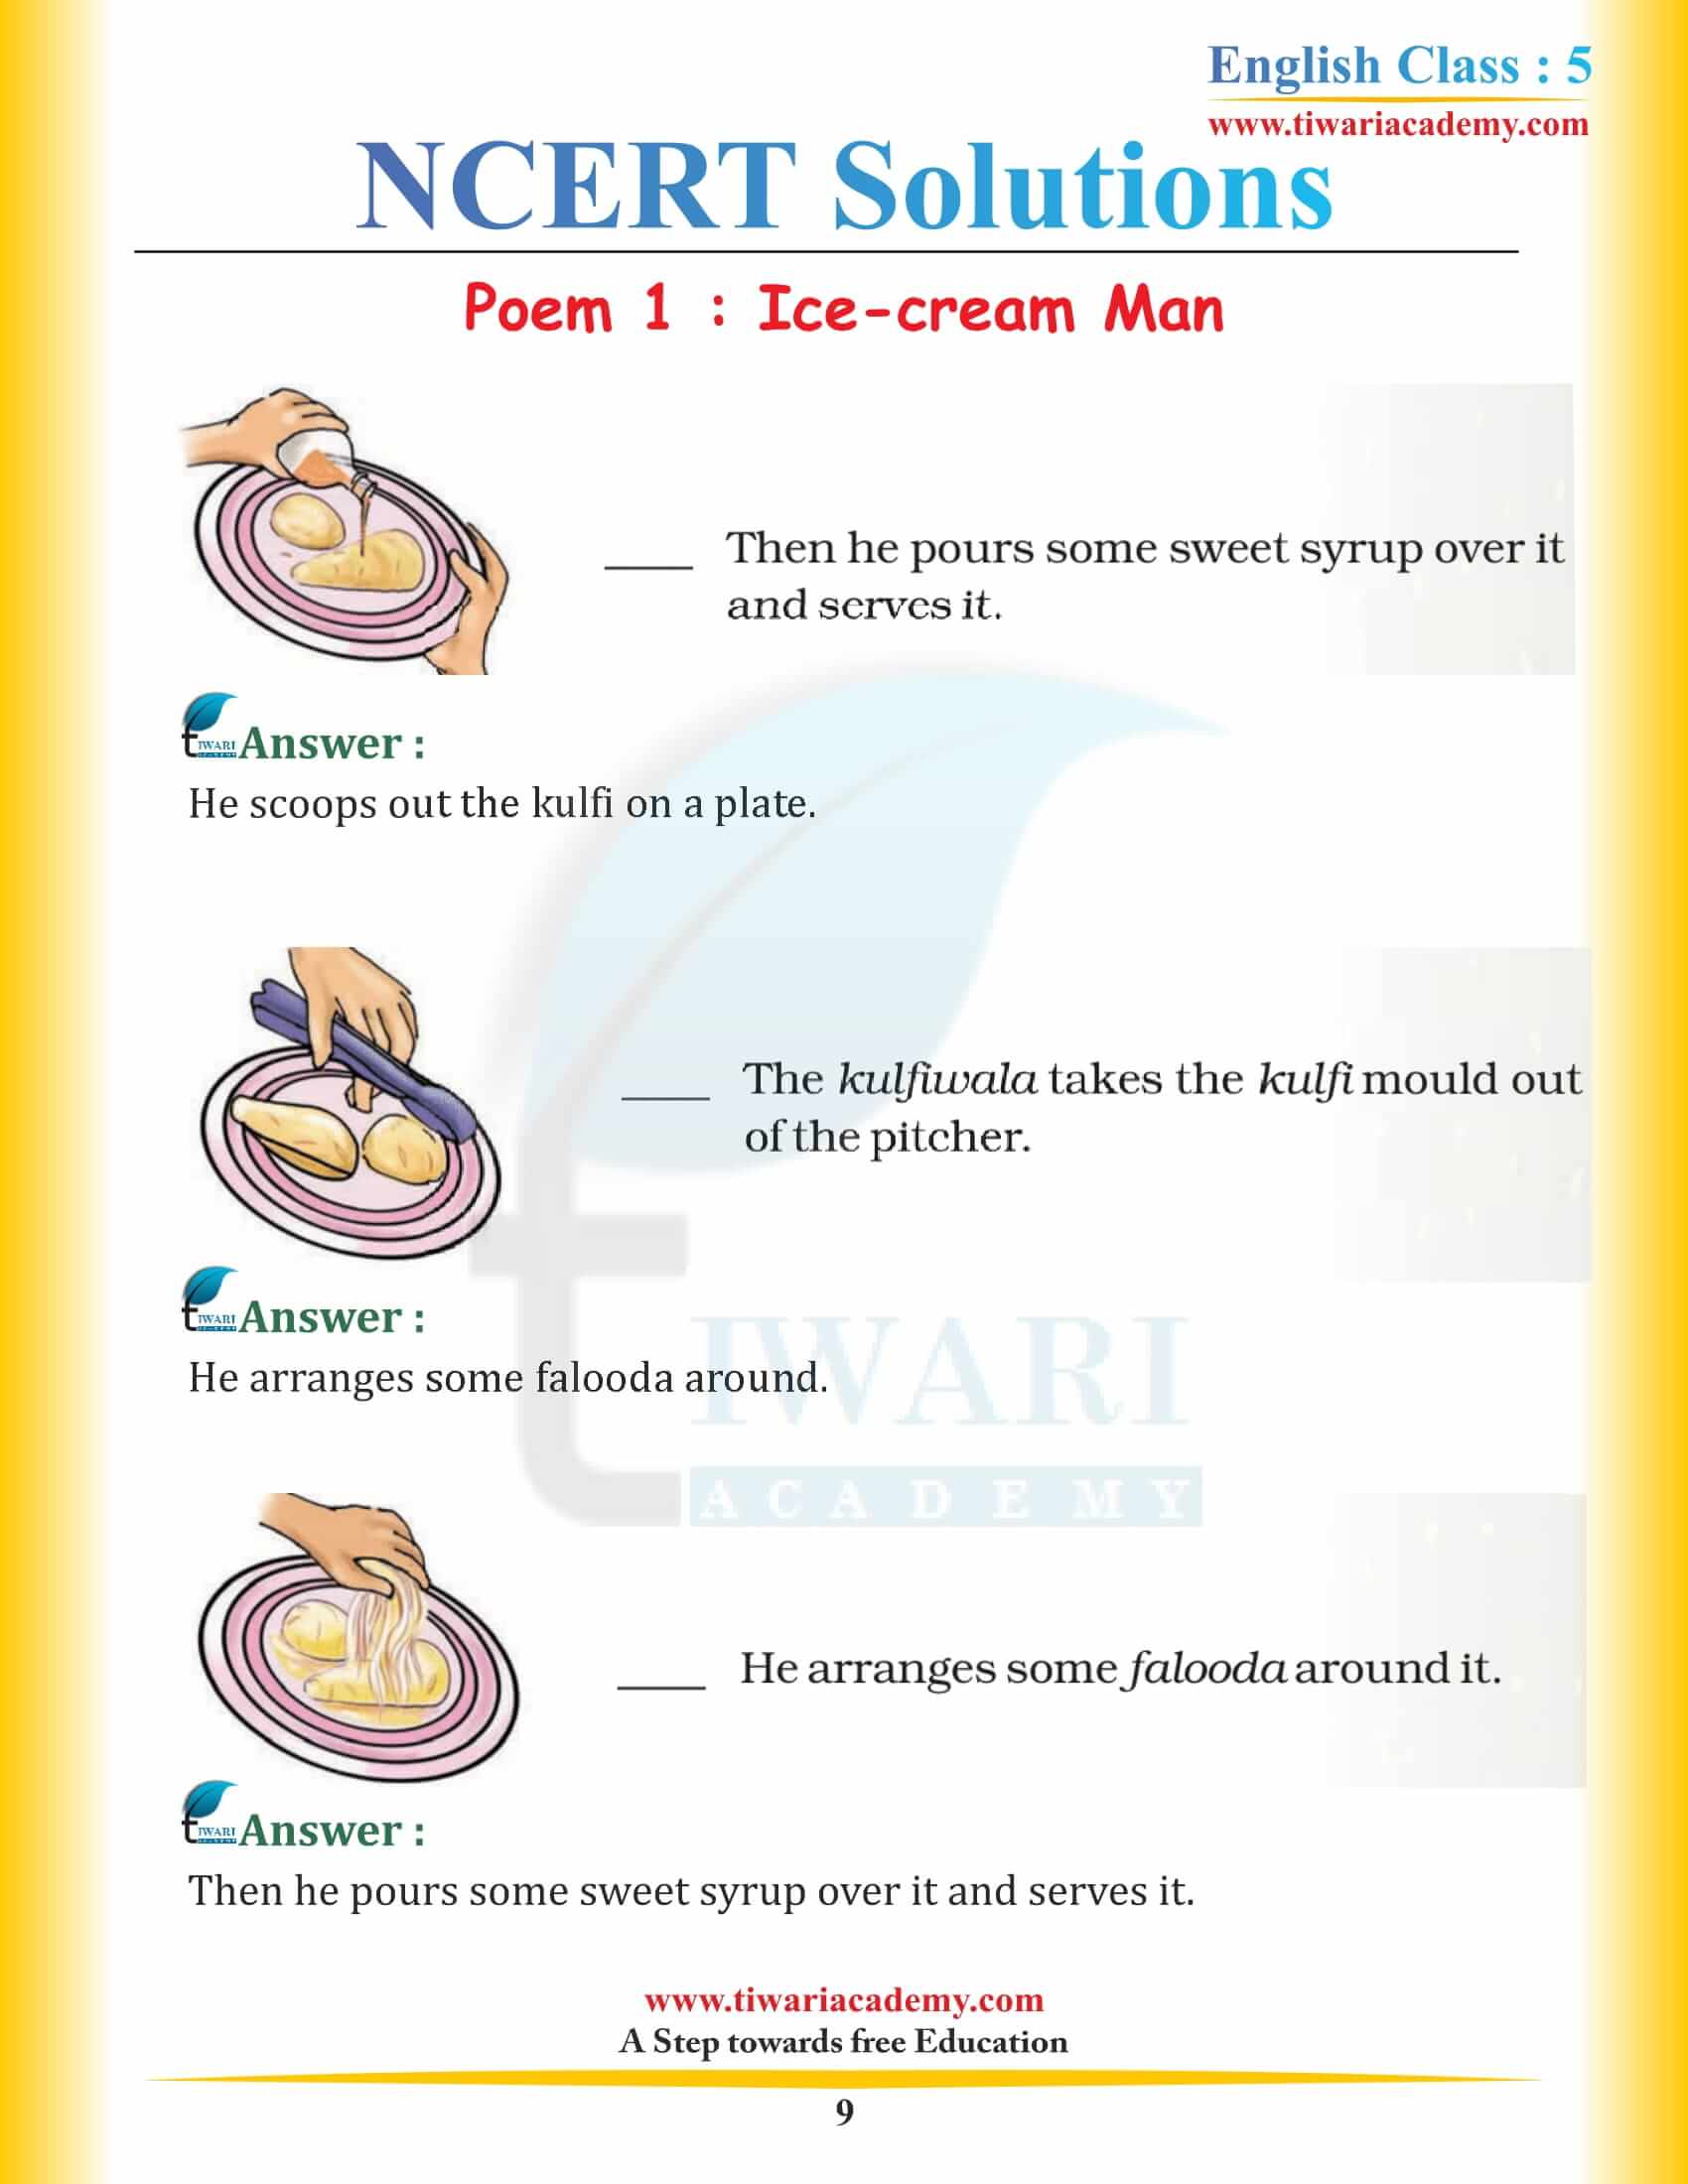 NCERT Solutions for Class 5 English Chapter 1 Ice-cream Man free download